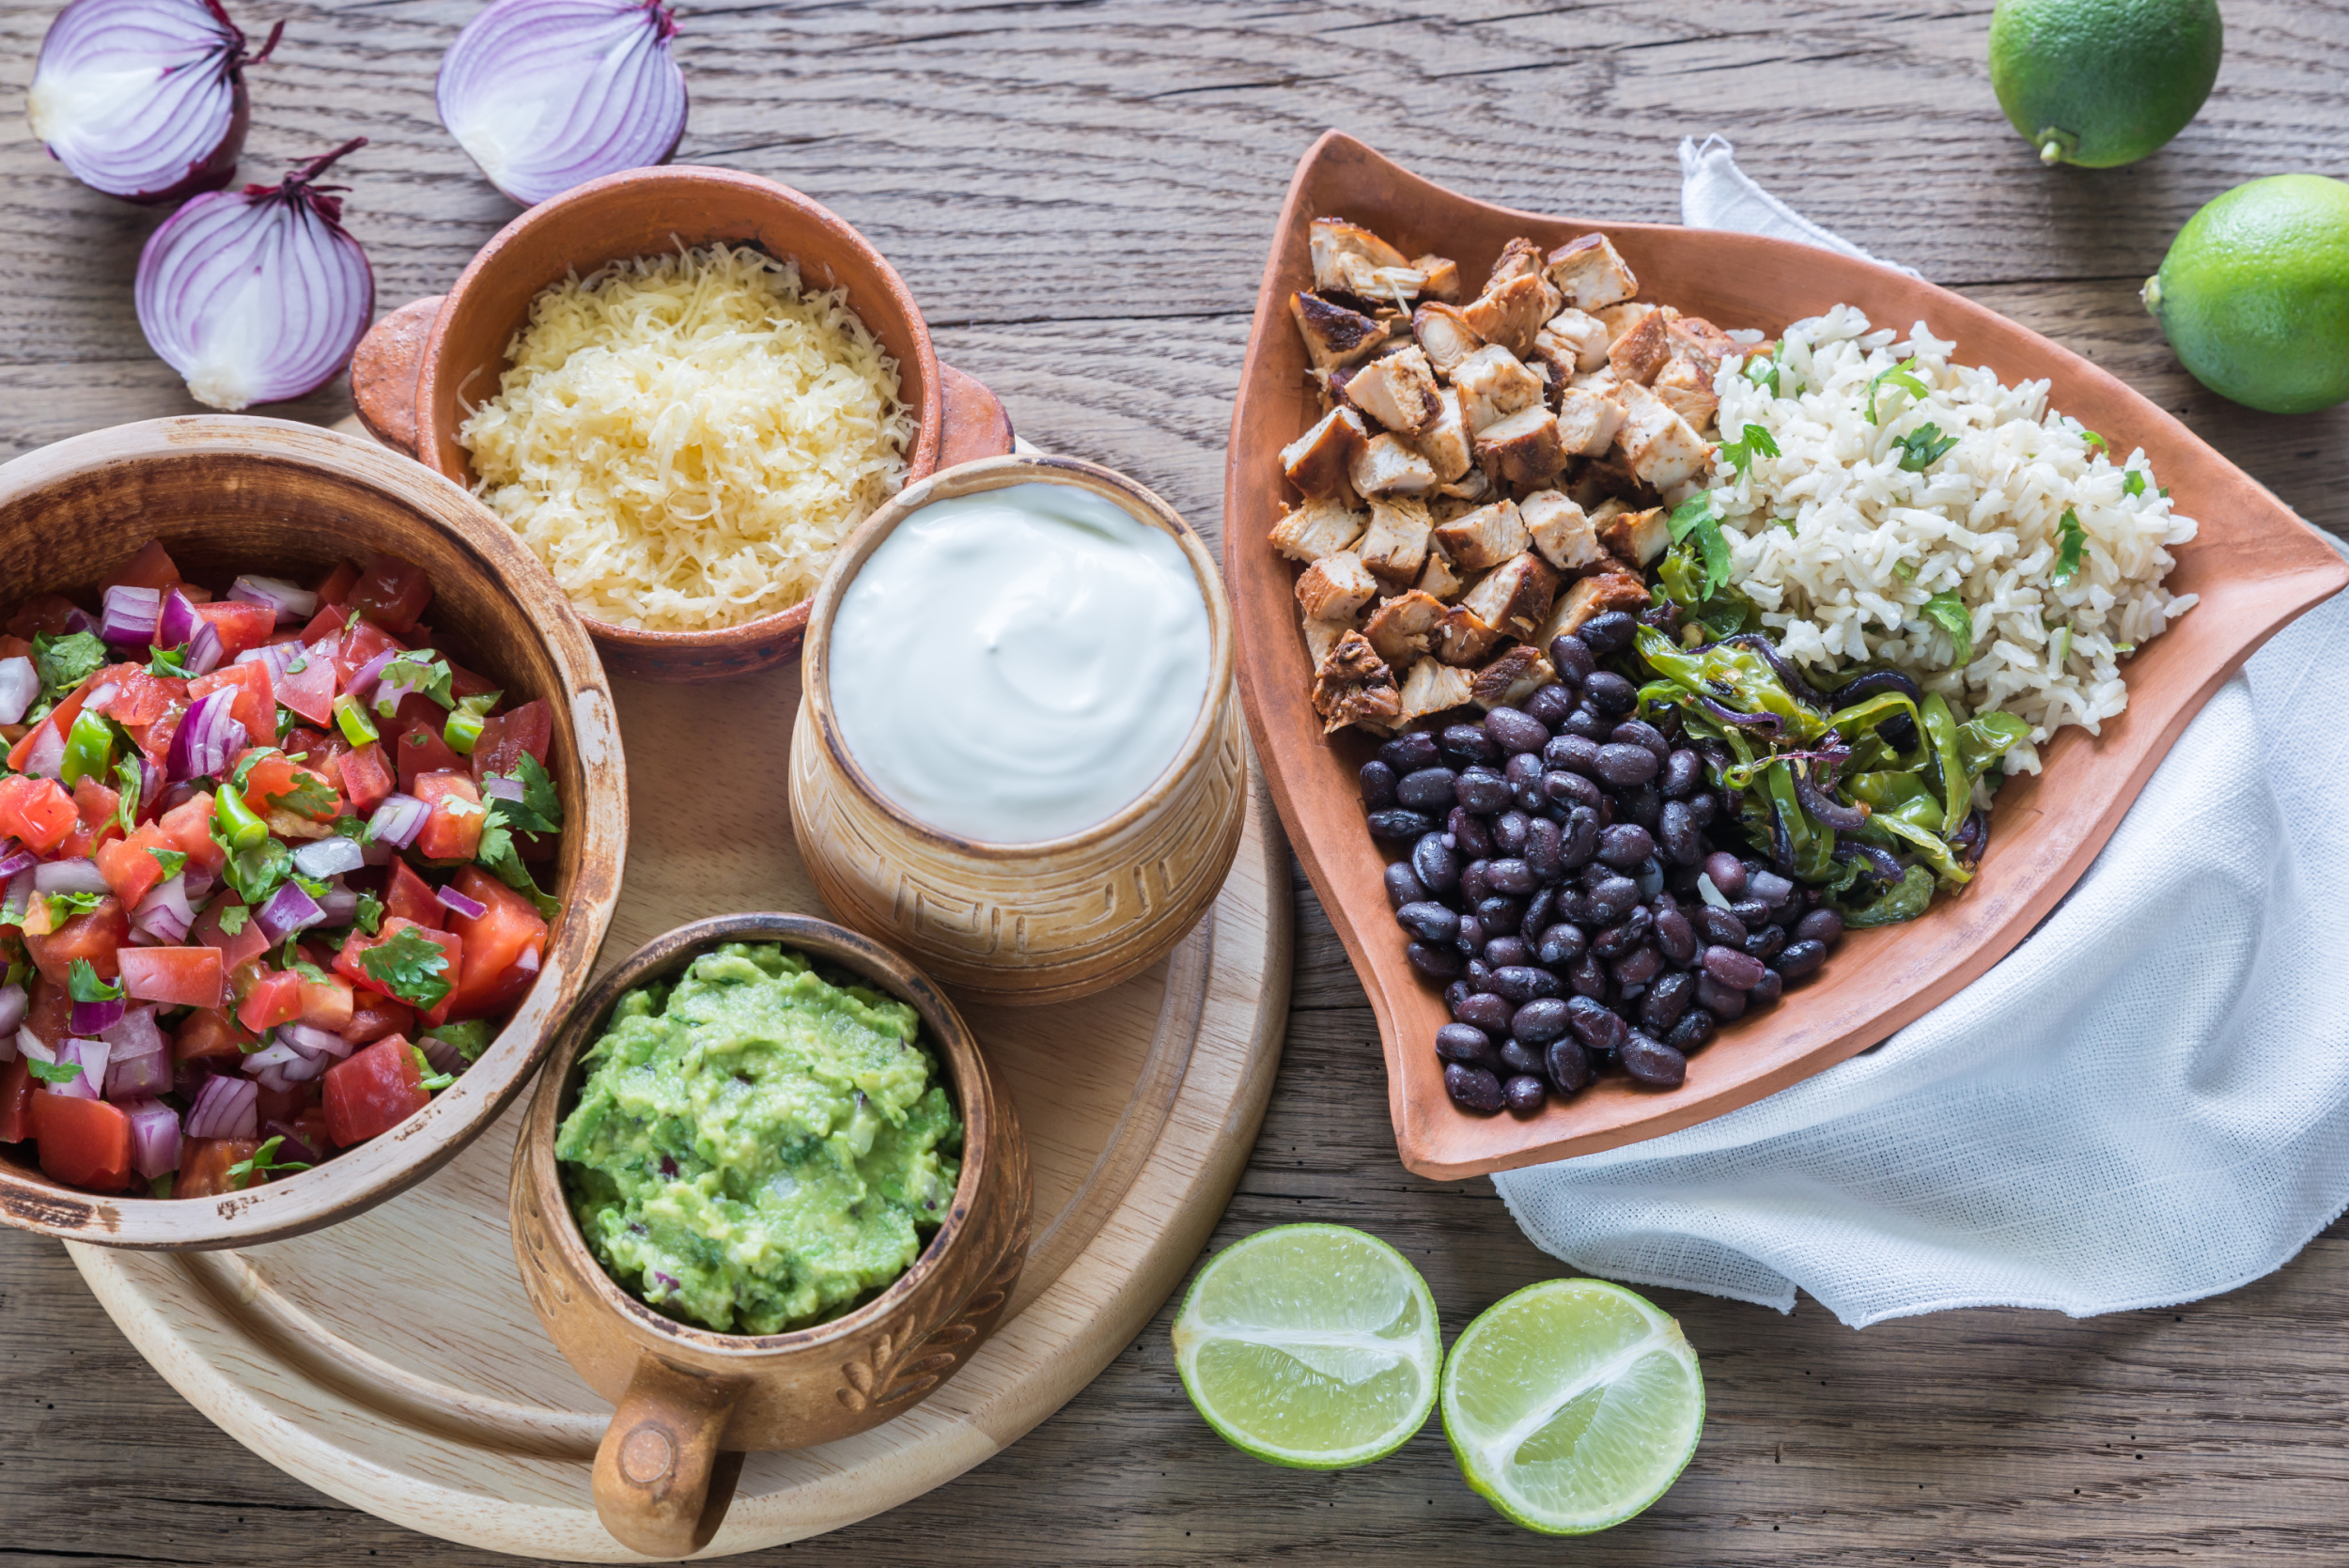 Taco Bar Ideas. Mexican food in bowls on a wooden table.